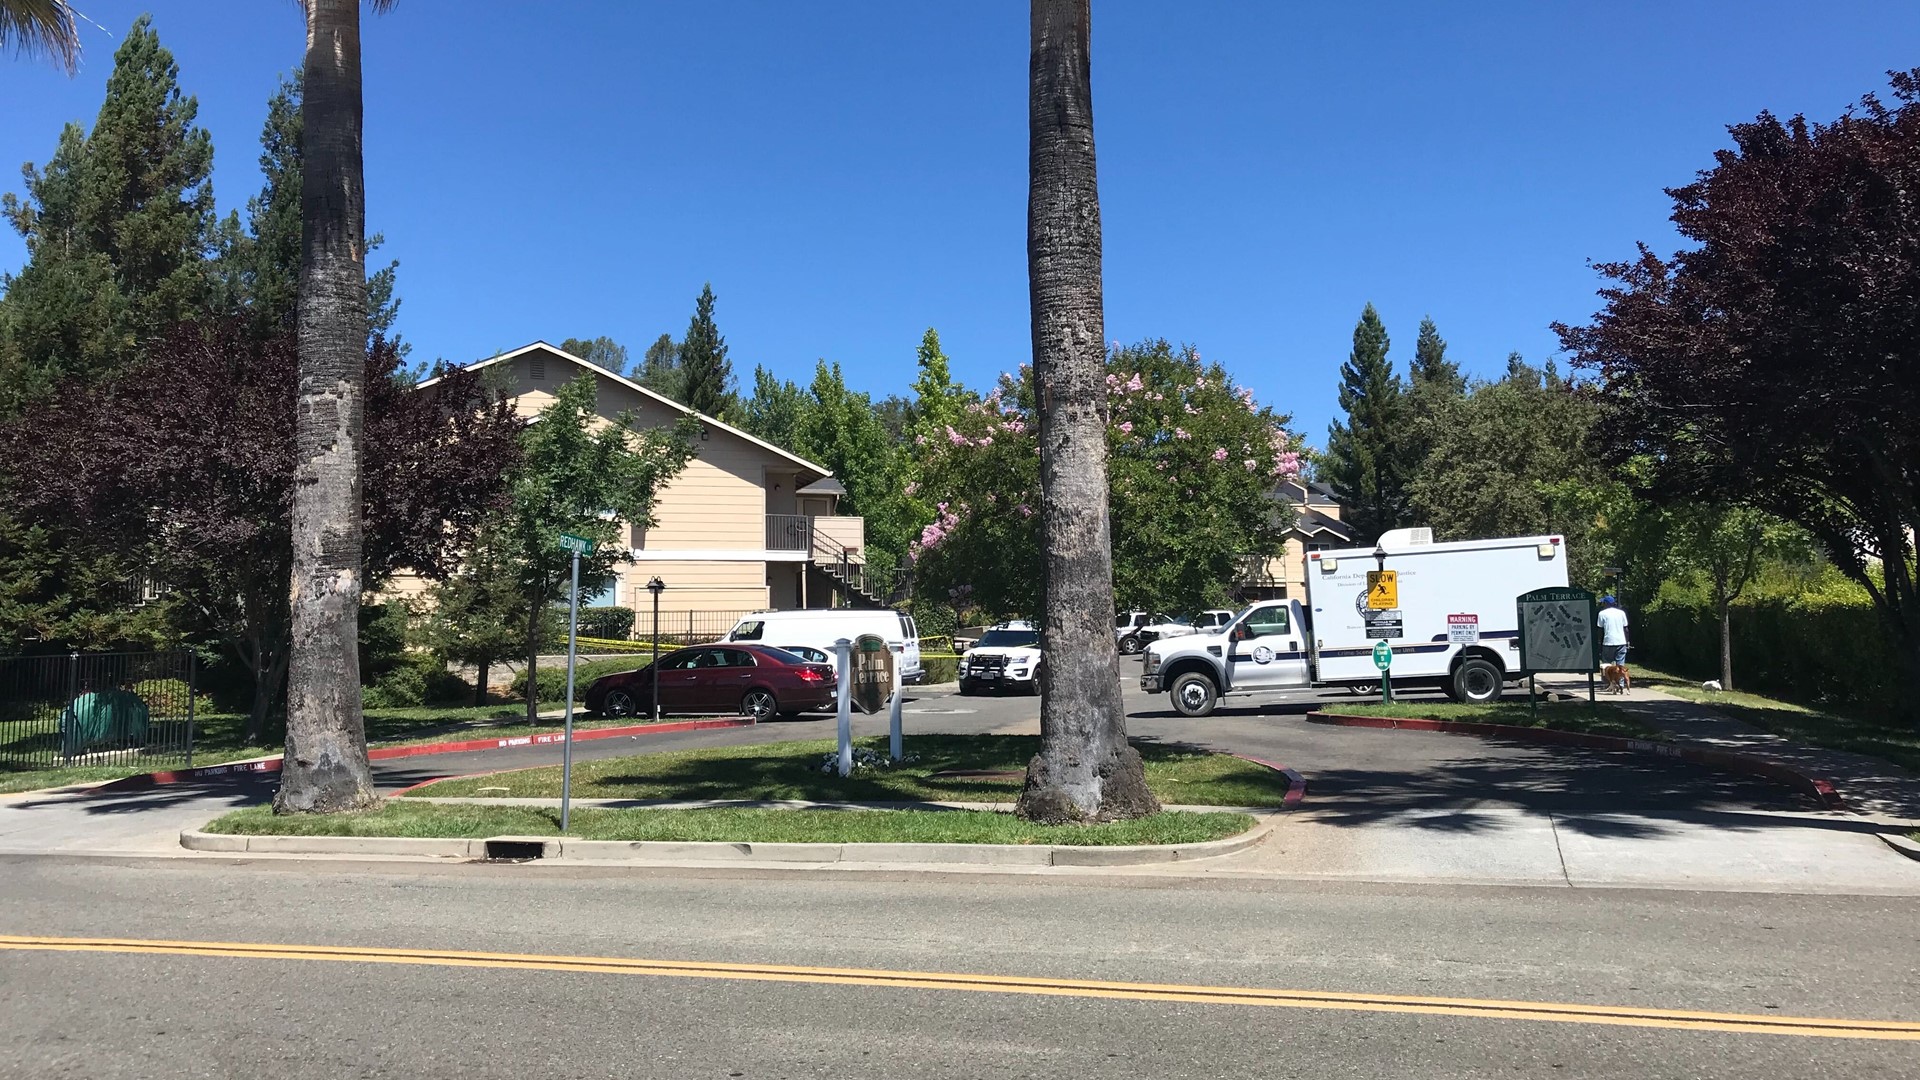 According to investigators, the shooting happened at some point while the 13-year-old victim, his little brother, and a friend were handling the gun.